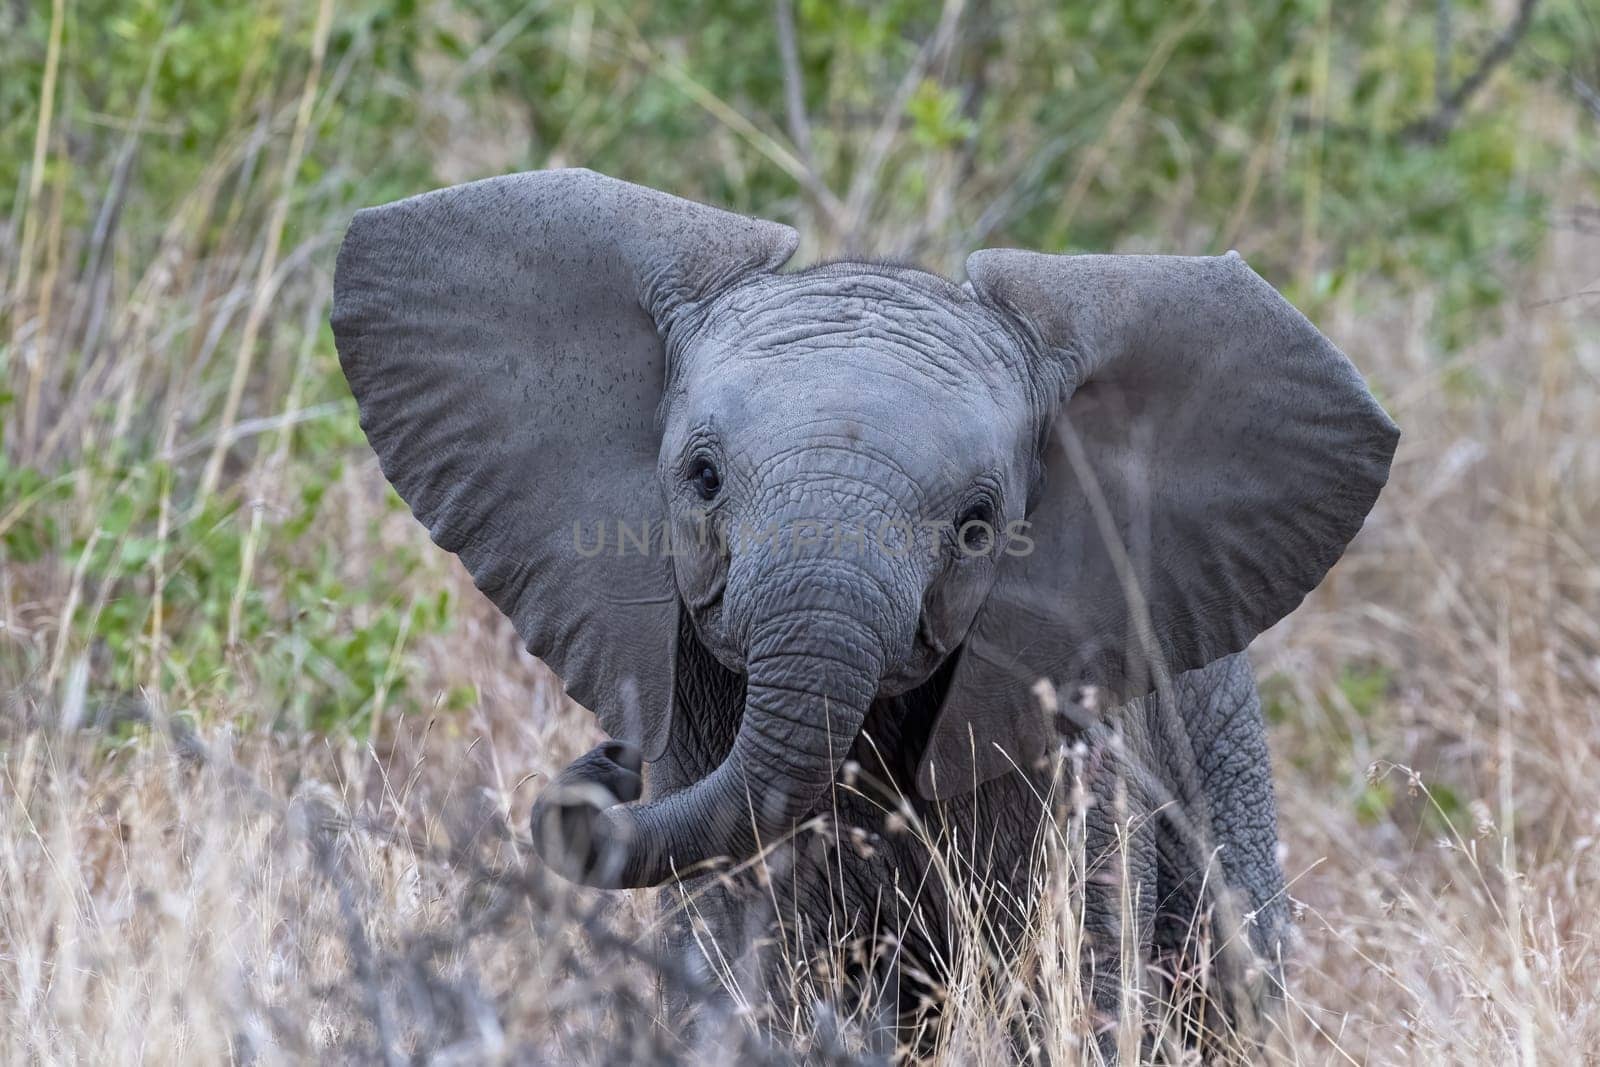 Young Baby African elephant in the Kruger National Park, South Africa portrait